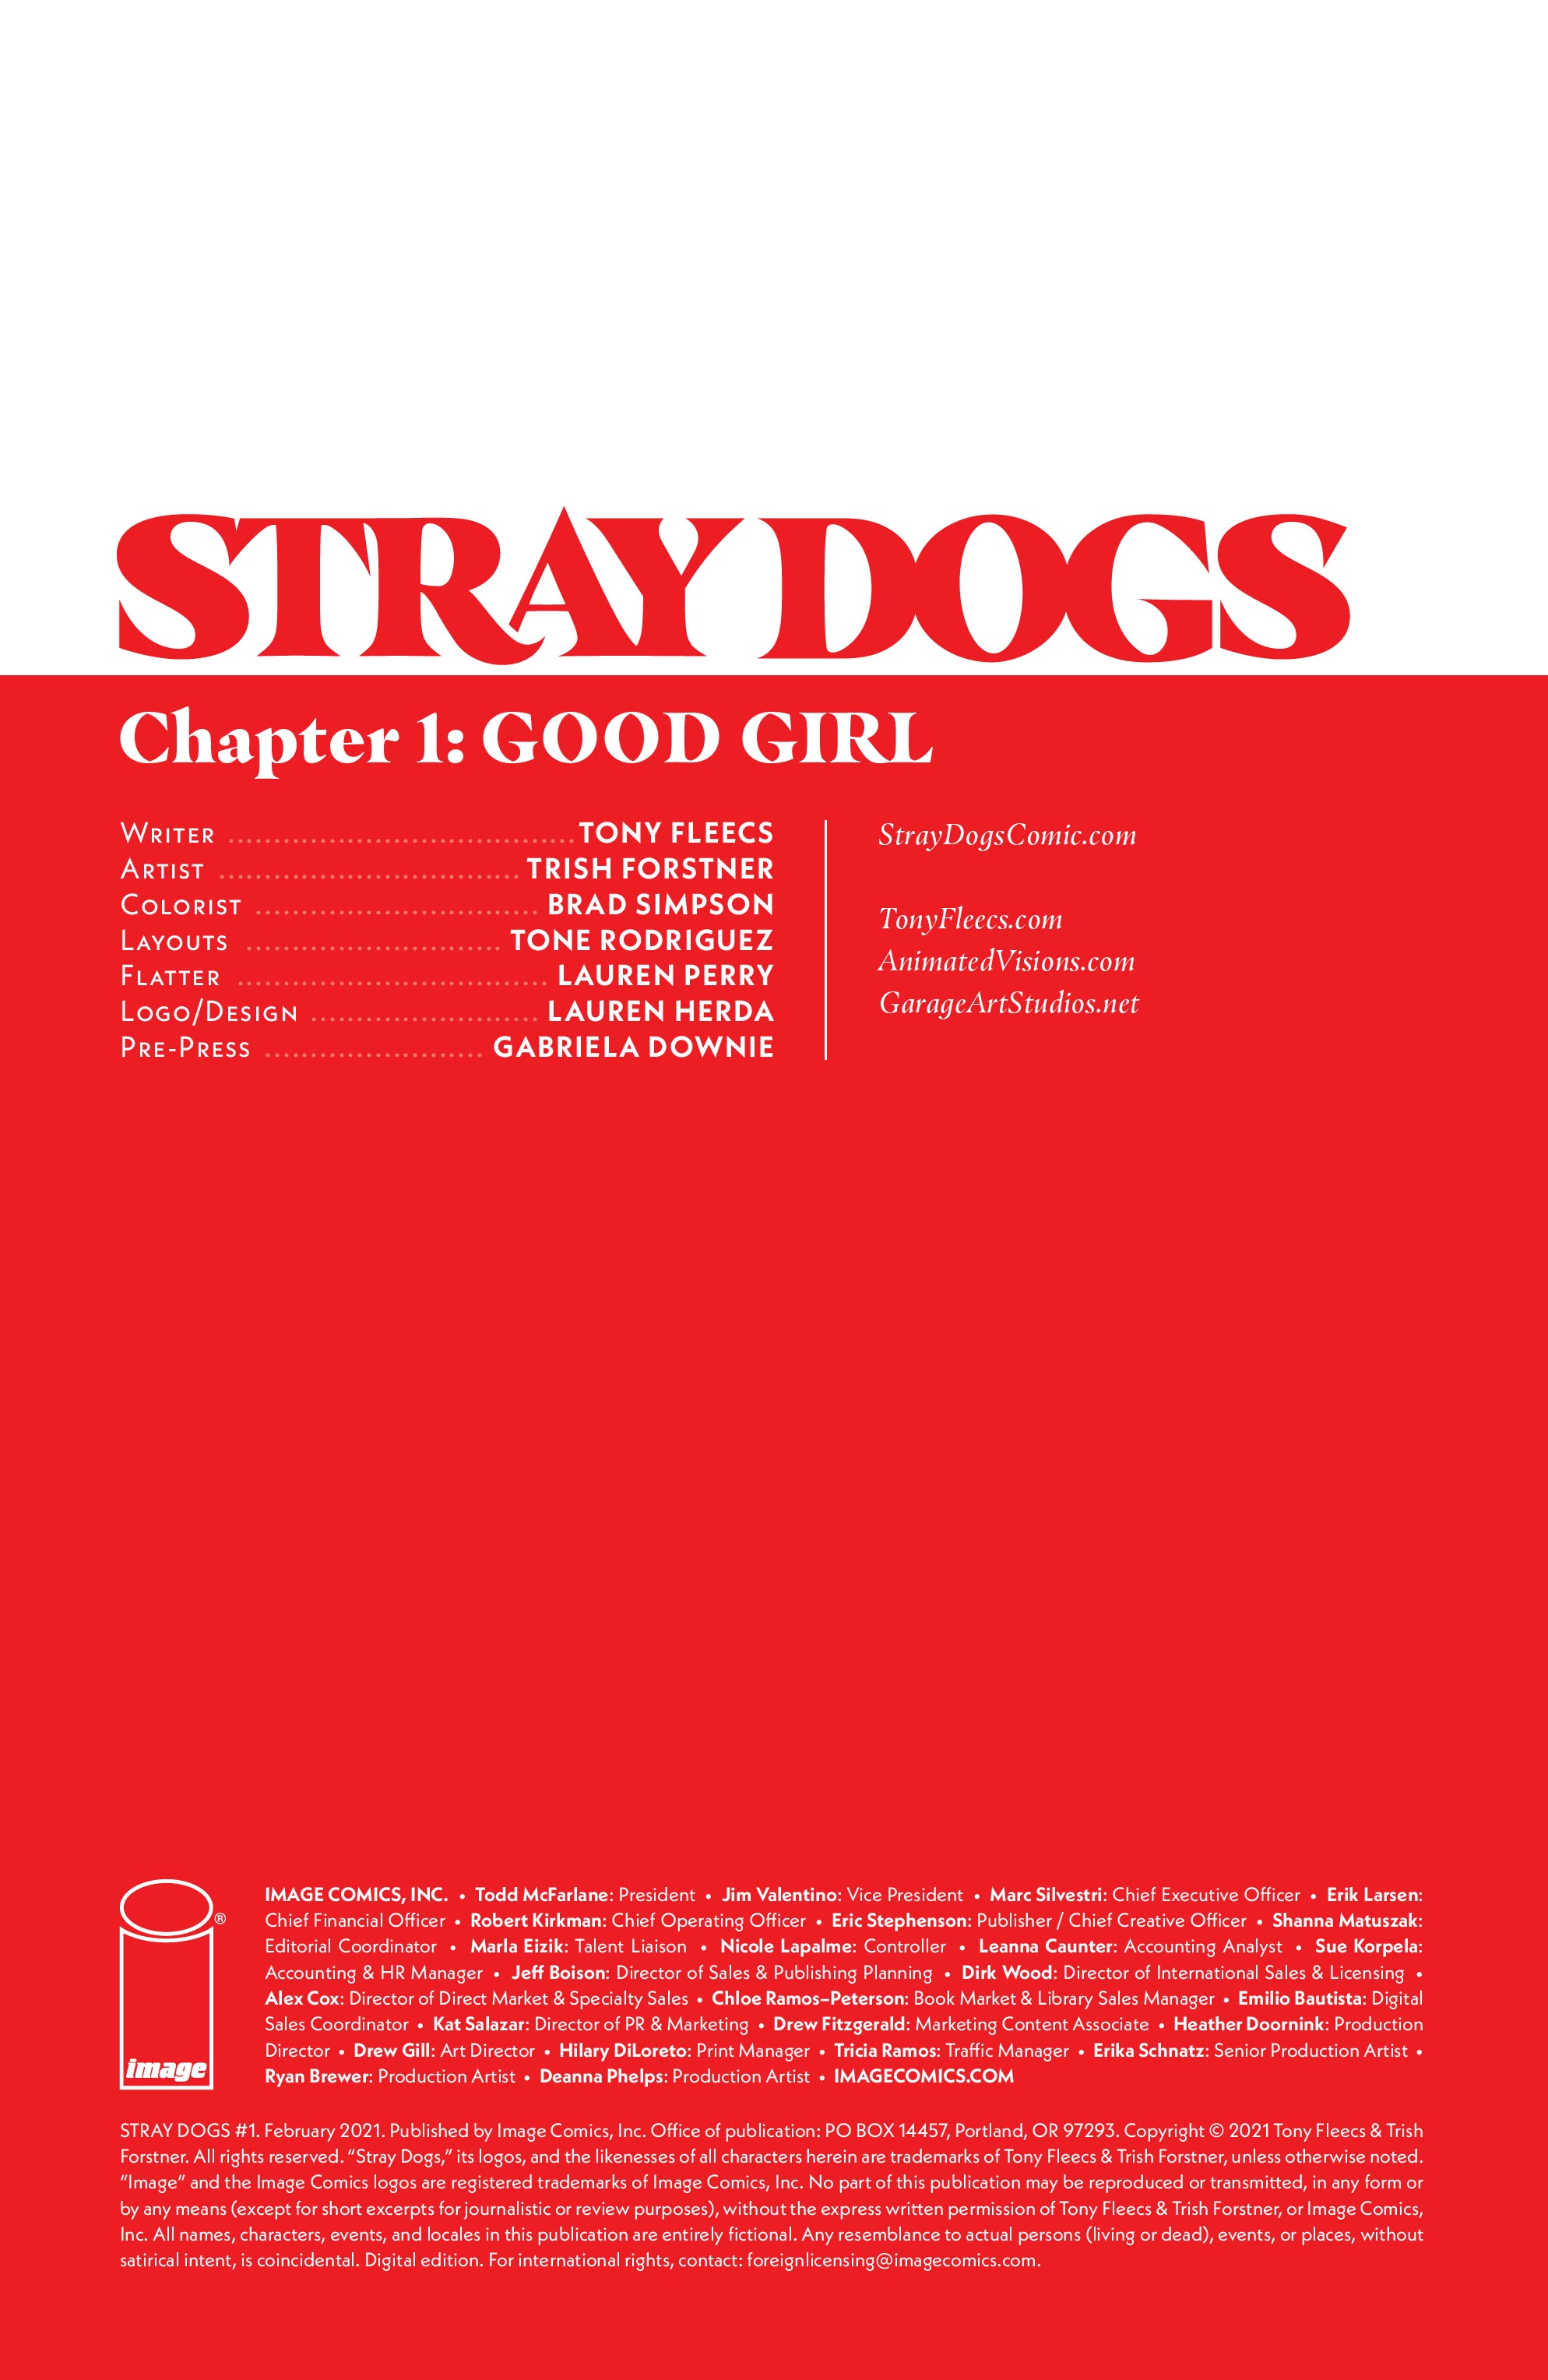 Read online Stray Dogs comic -  Issue #1 - 2